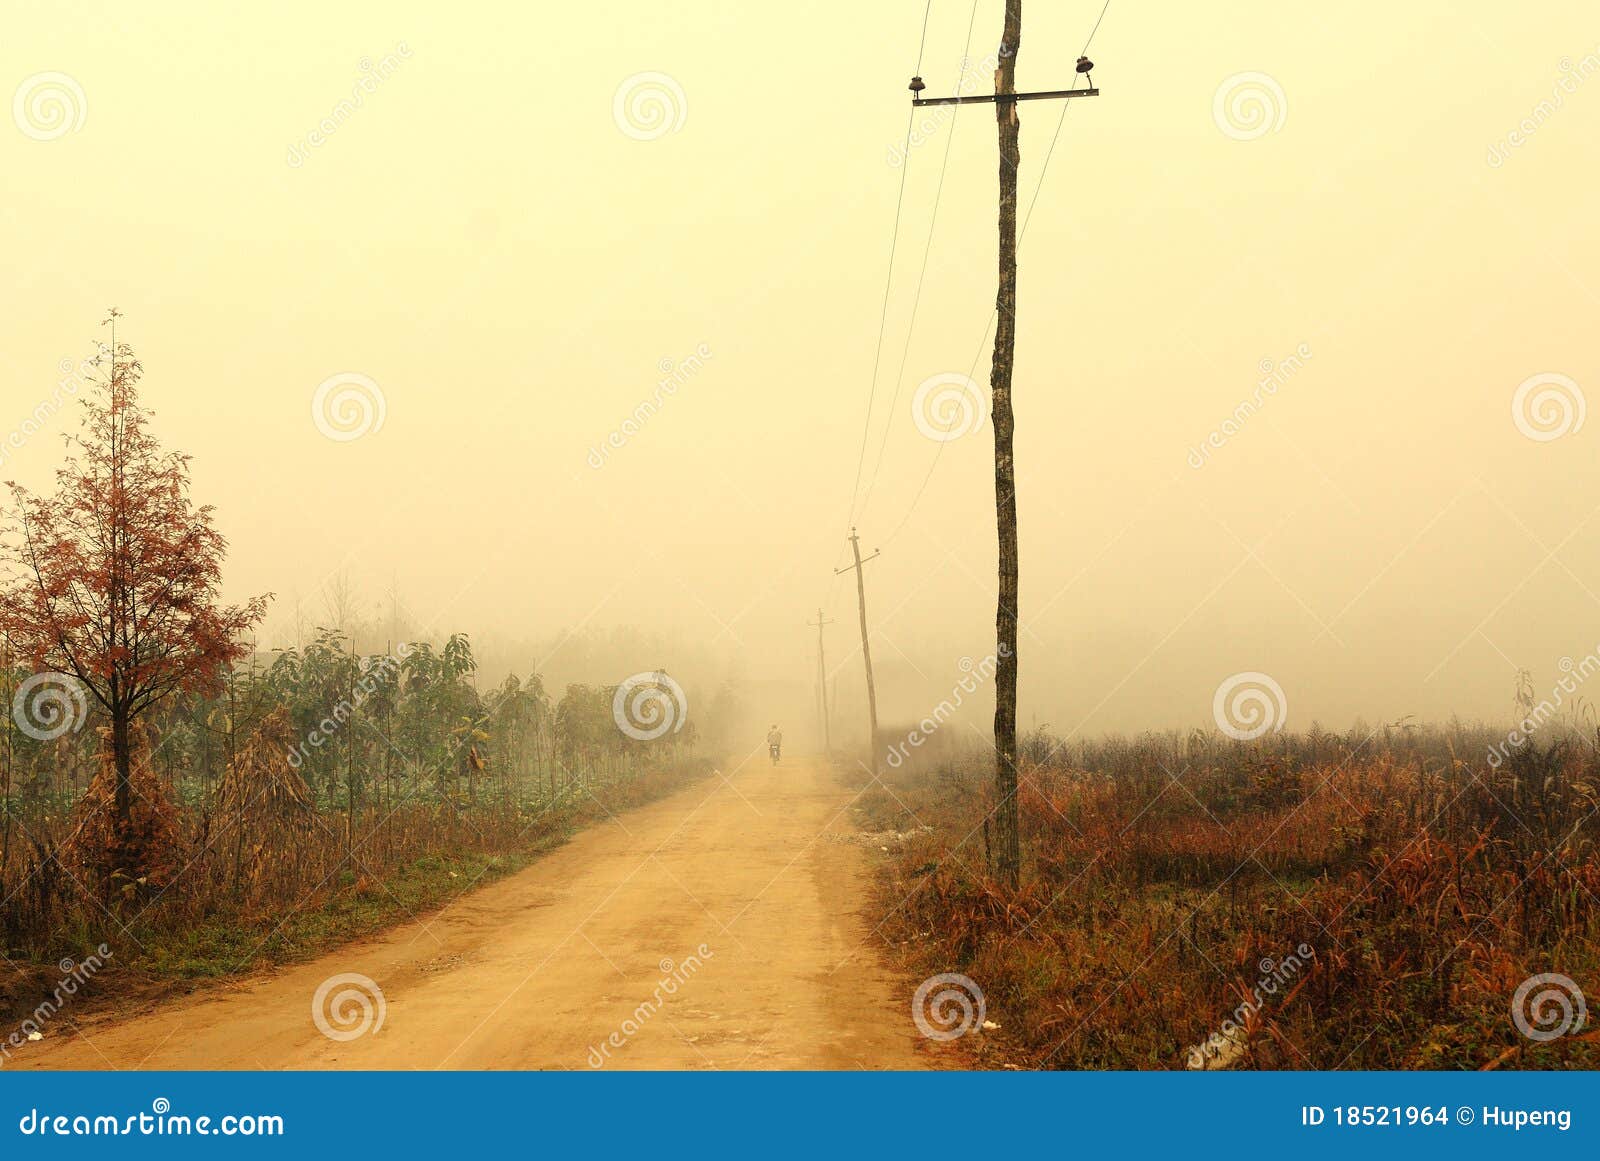 road and telegraph pole